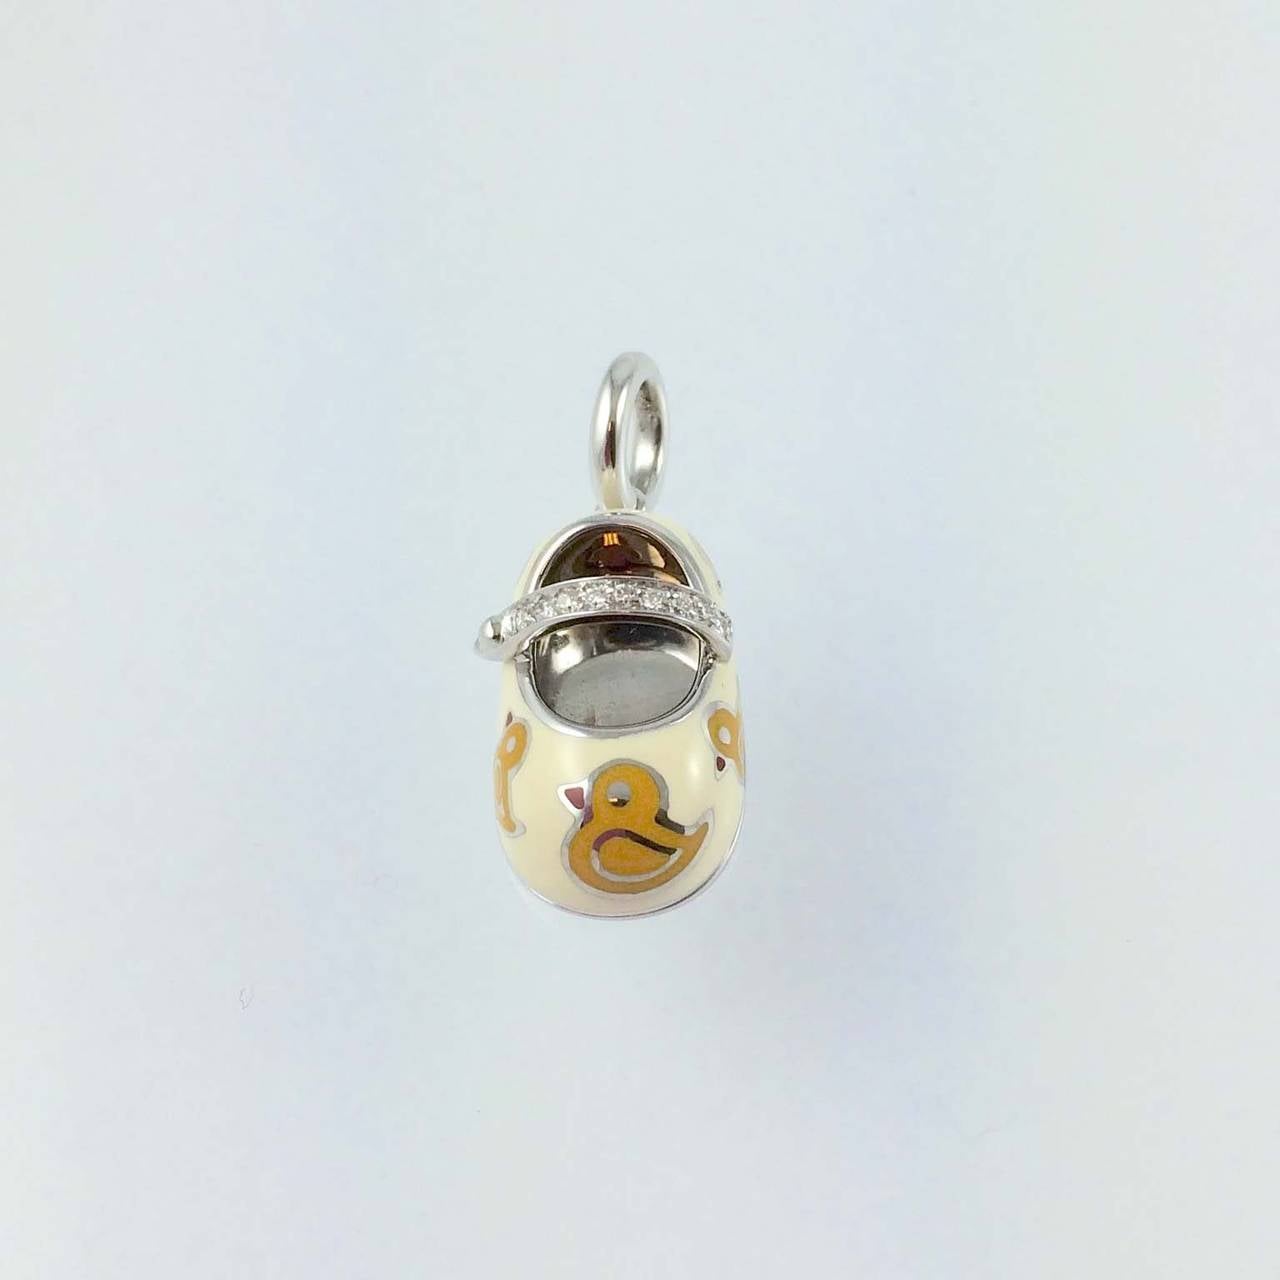 Aaron Basha 18K white gold, white enamel with yellow ducks baby shoe charm with diamond strap, pave set with 9 full cut round diamonds weighing .07 carats, G color, VS clarity, suspended from a 18K white gold bale.